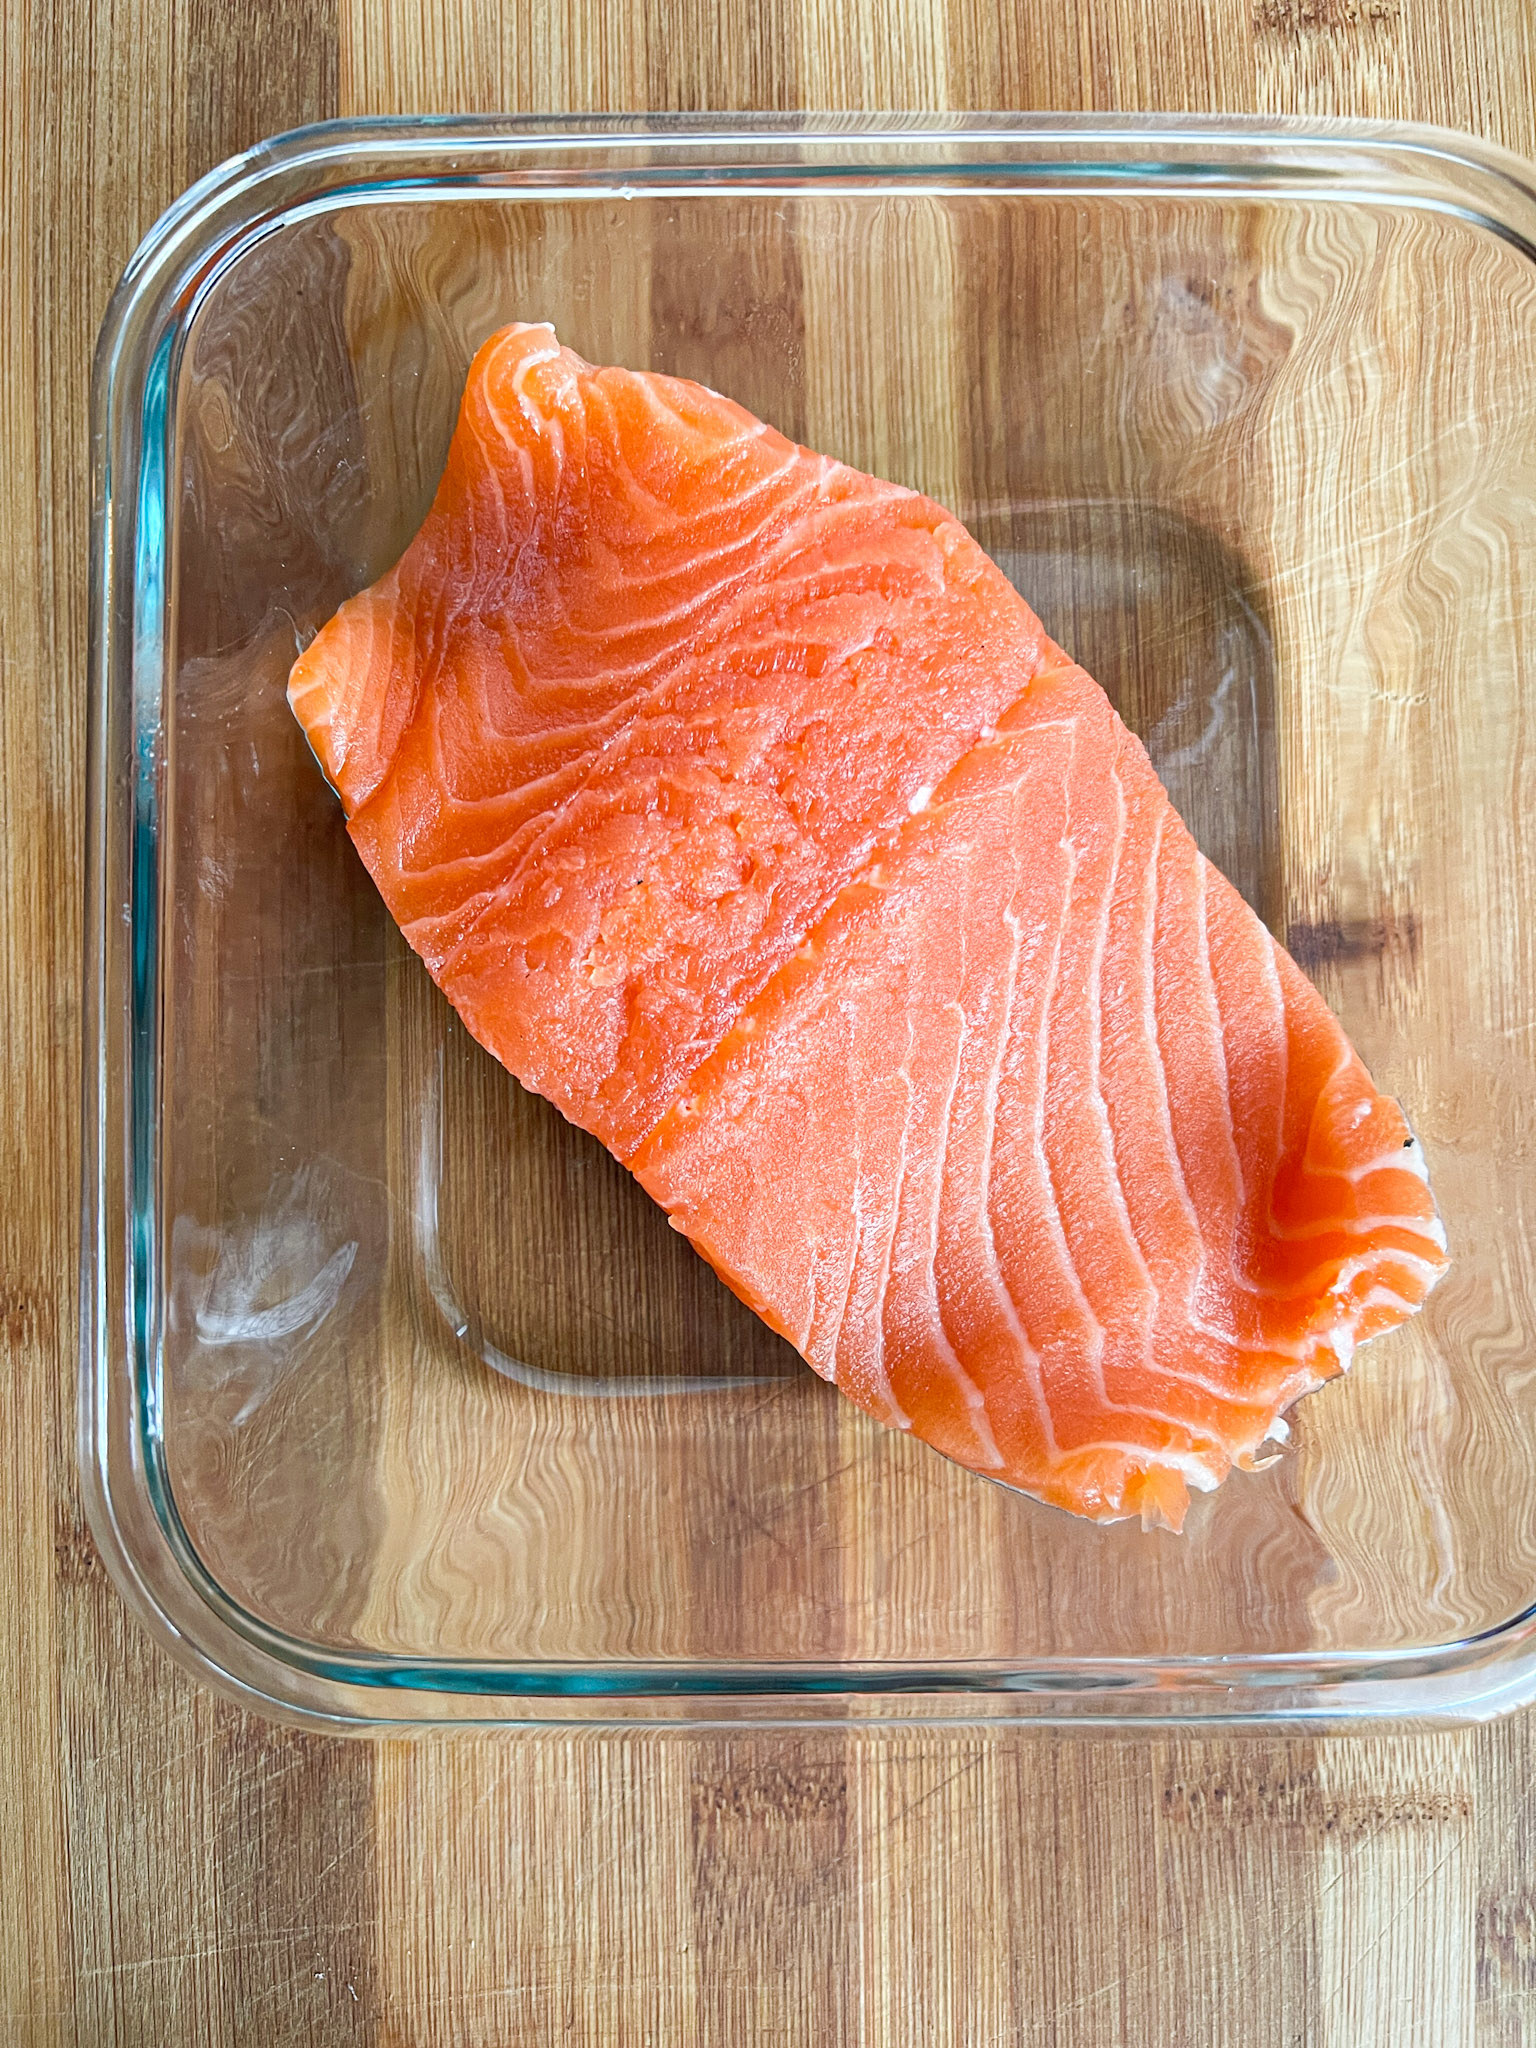 A piece of salmon on a glass platter